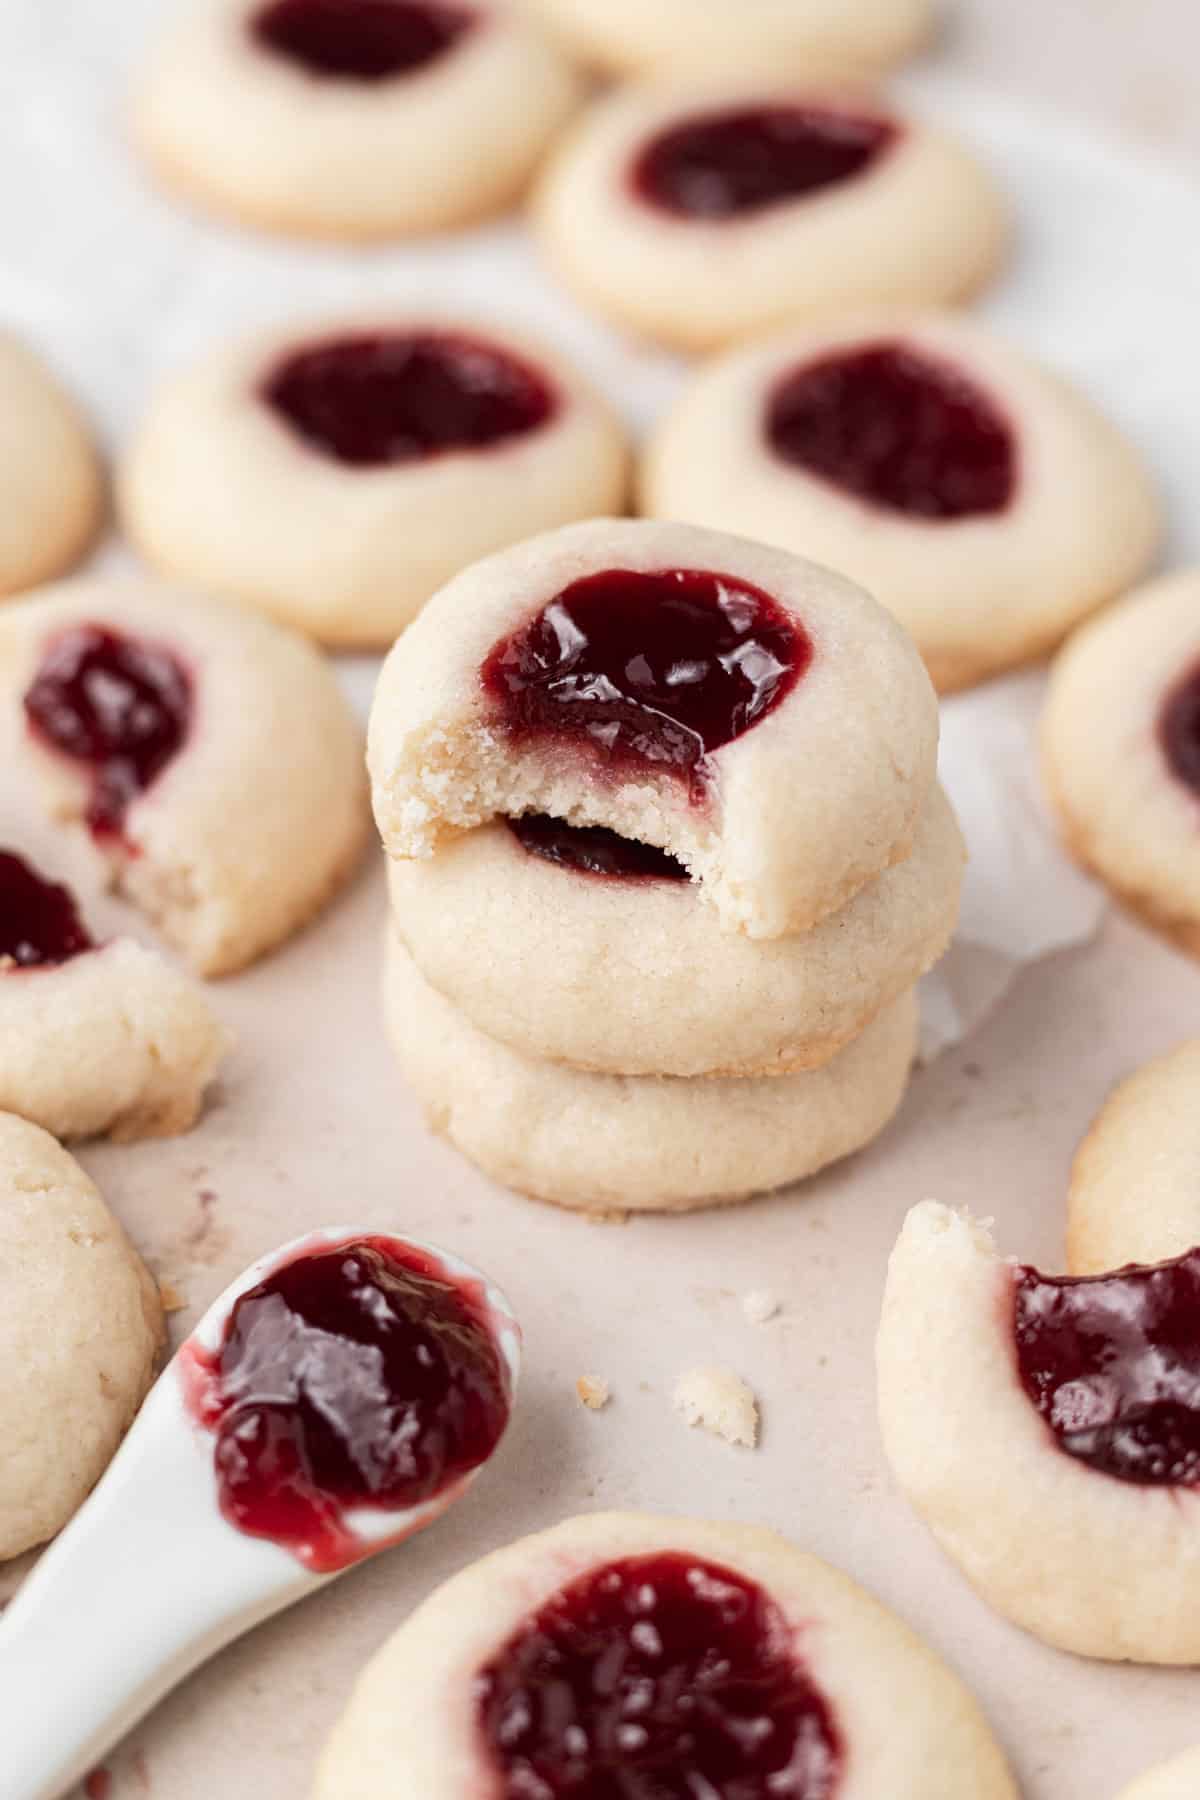 stack of 3 cookies with the top one missing a bite, surrounding by other cookies and spoon of jam